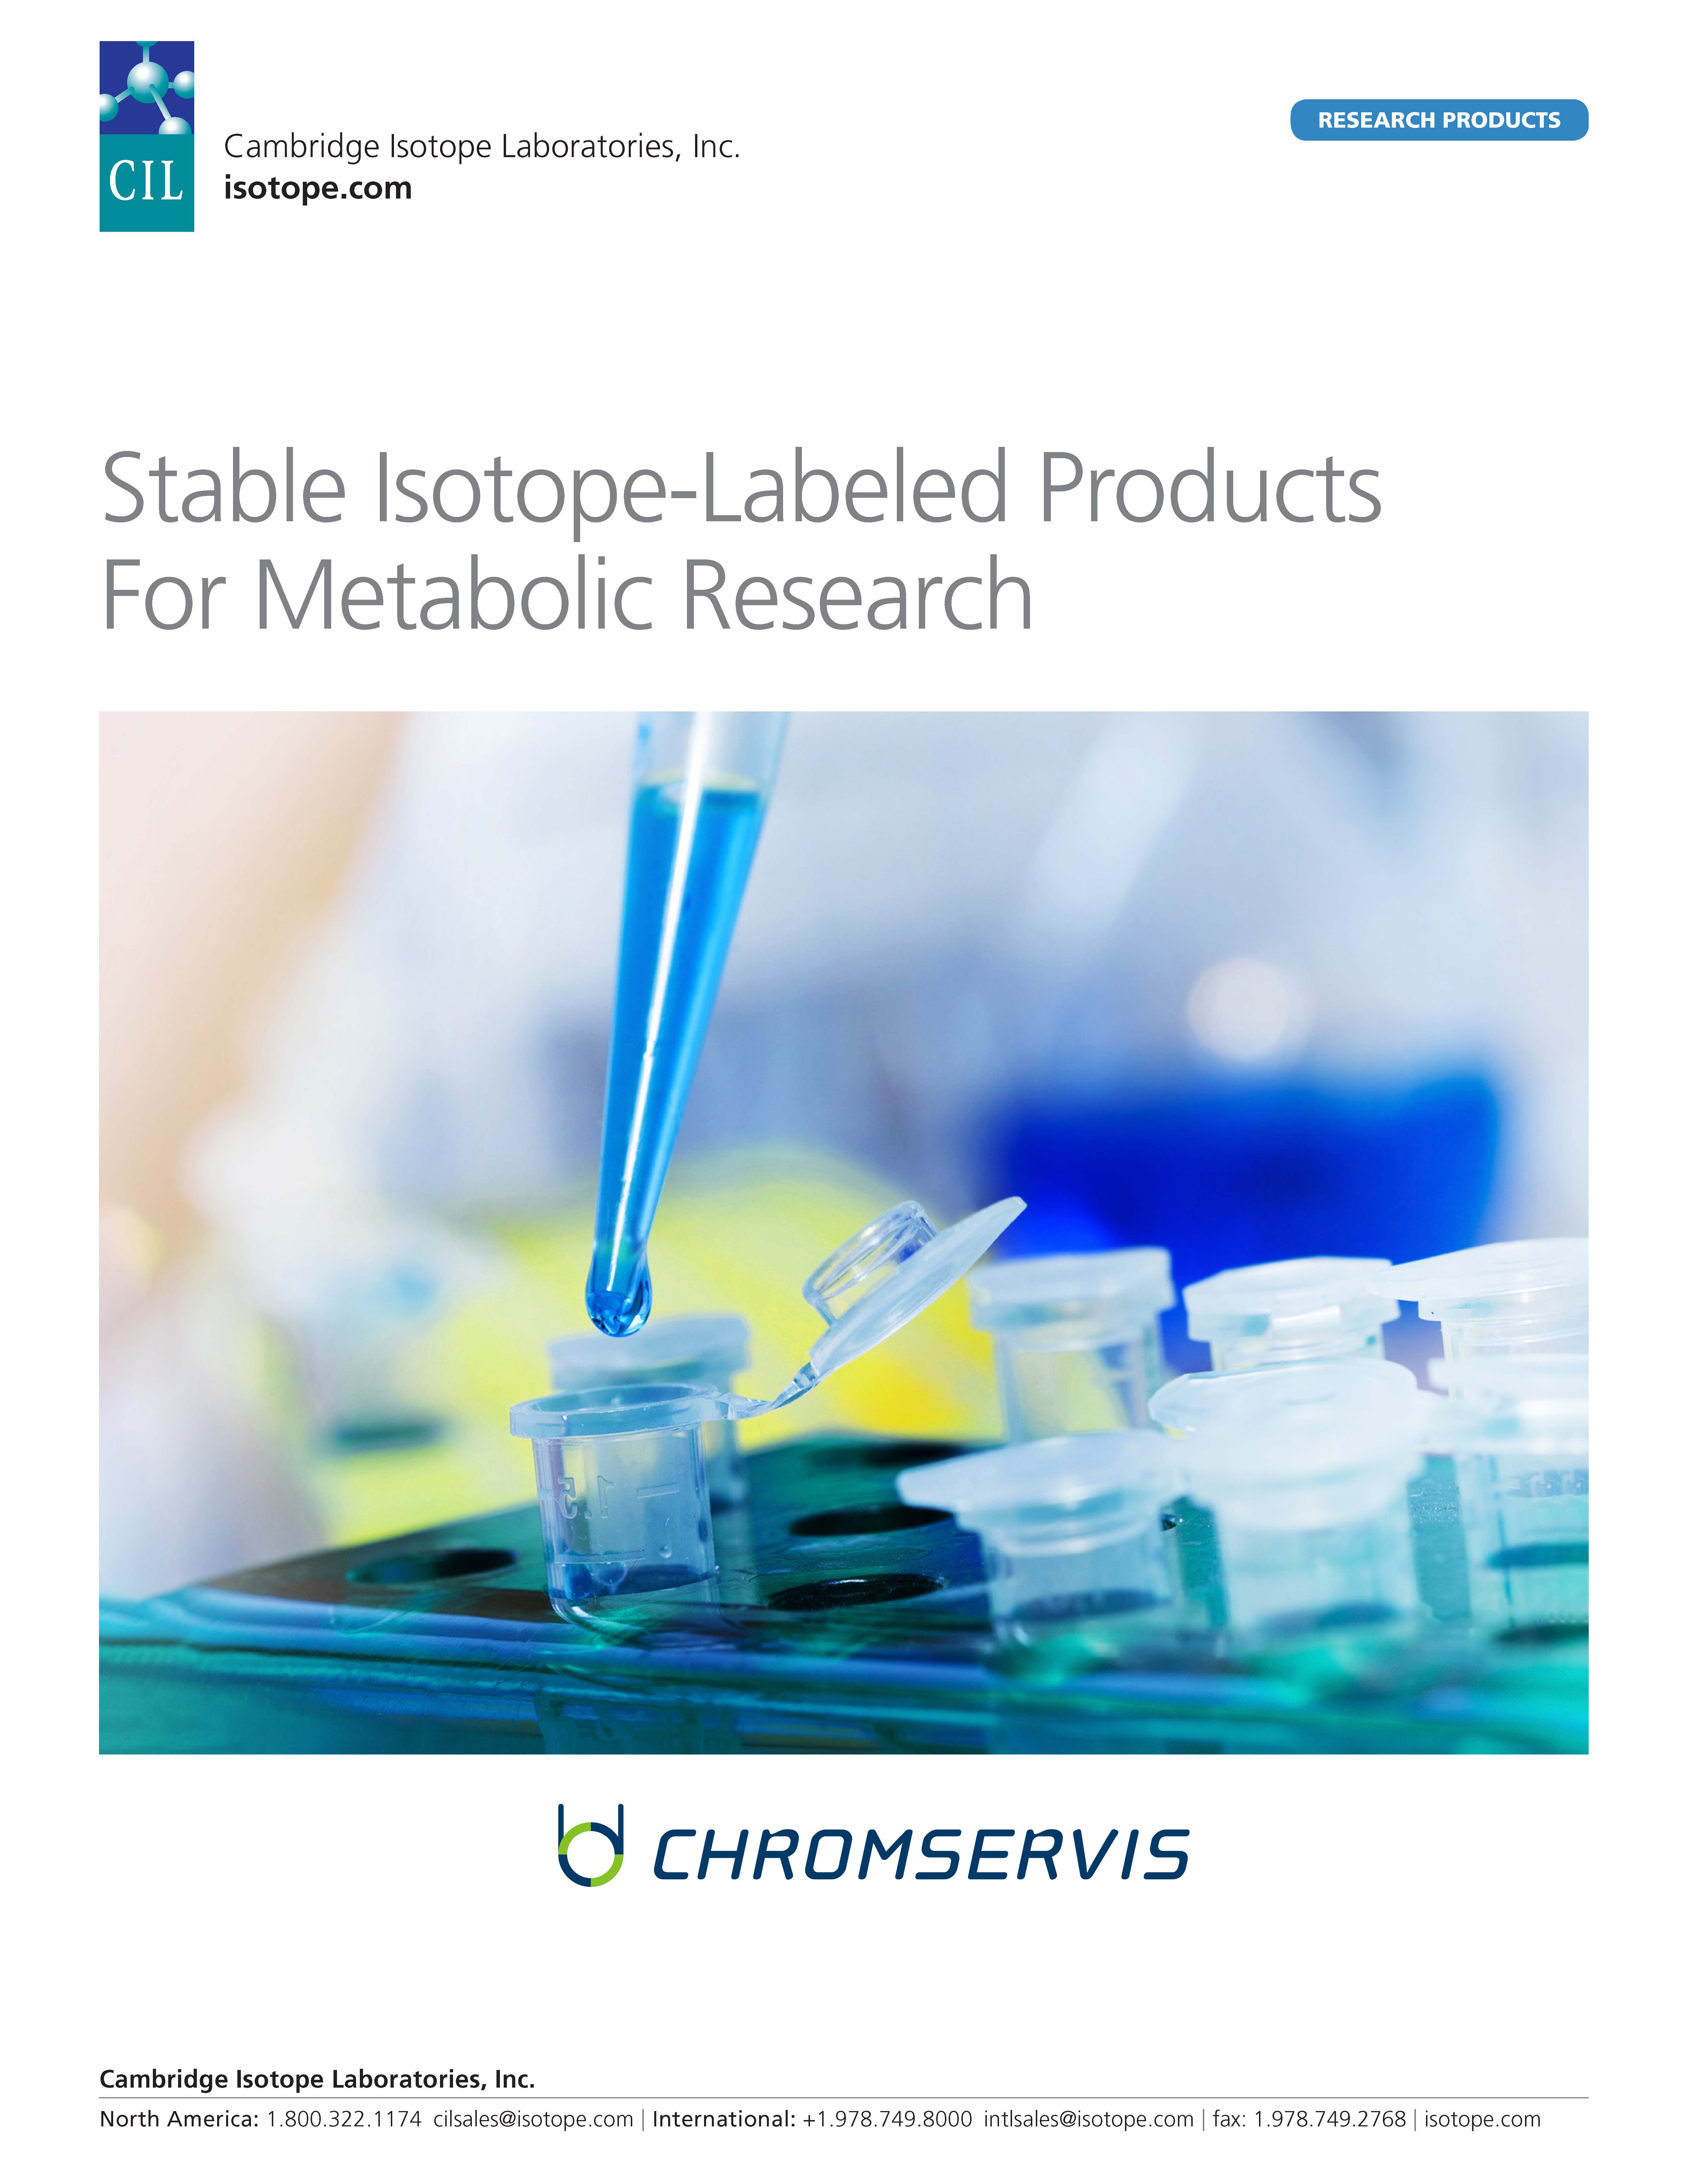 Stable Isotope-Labeled ProductsFor Metabolic Research